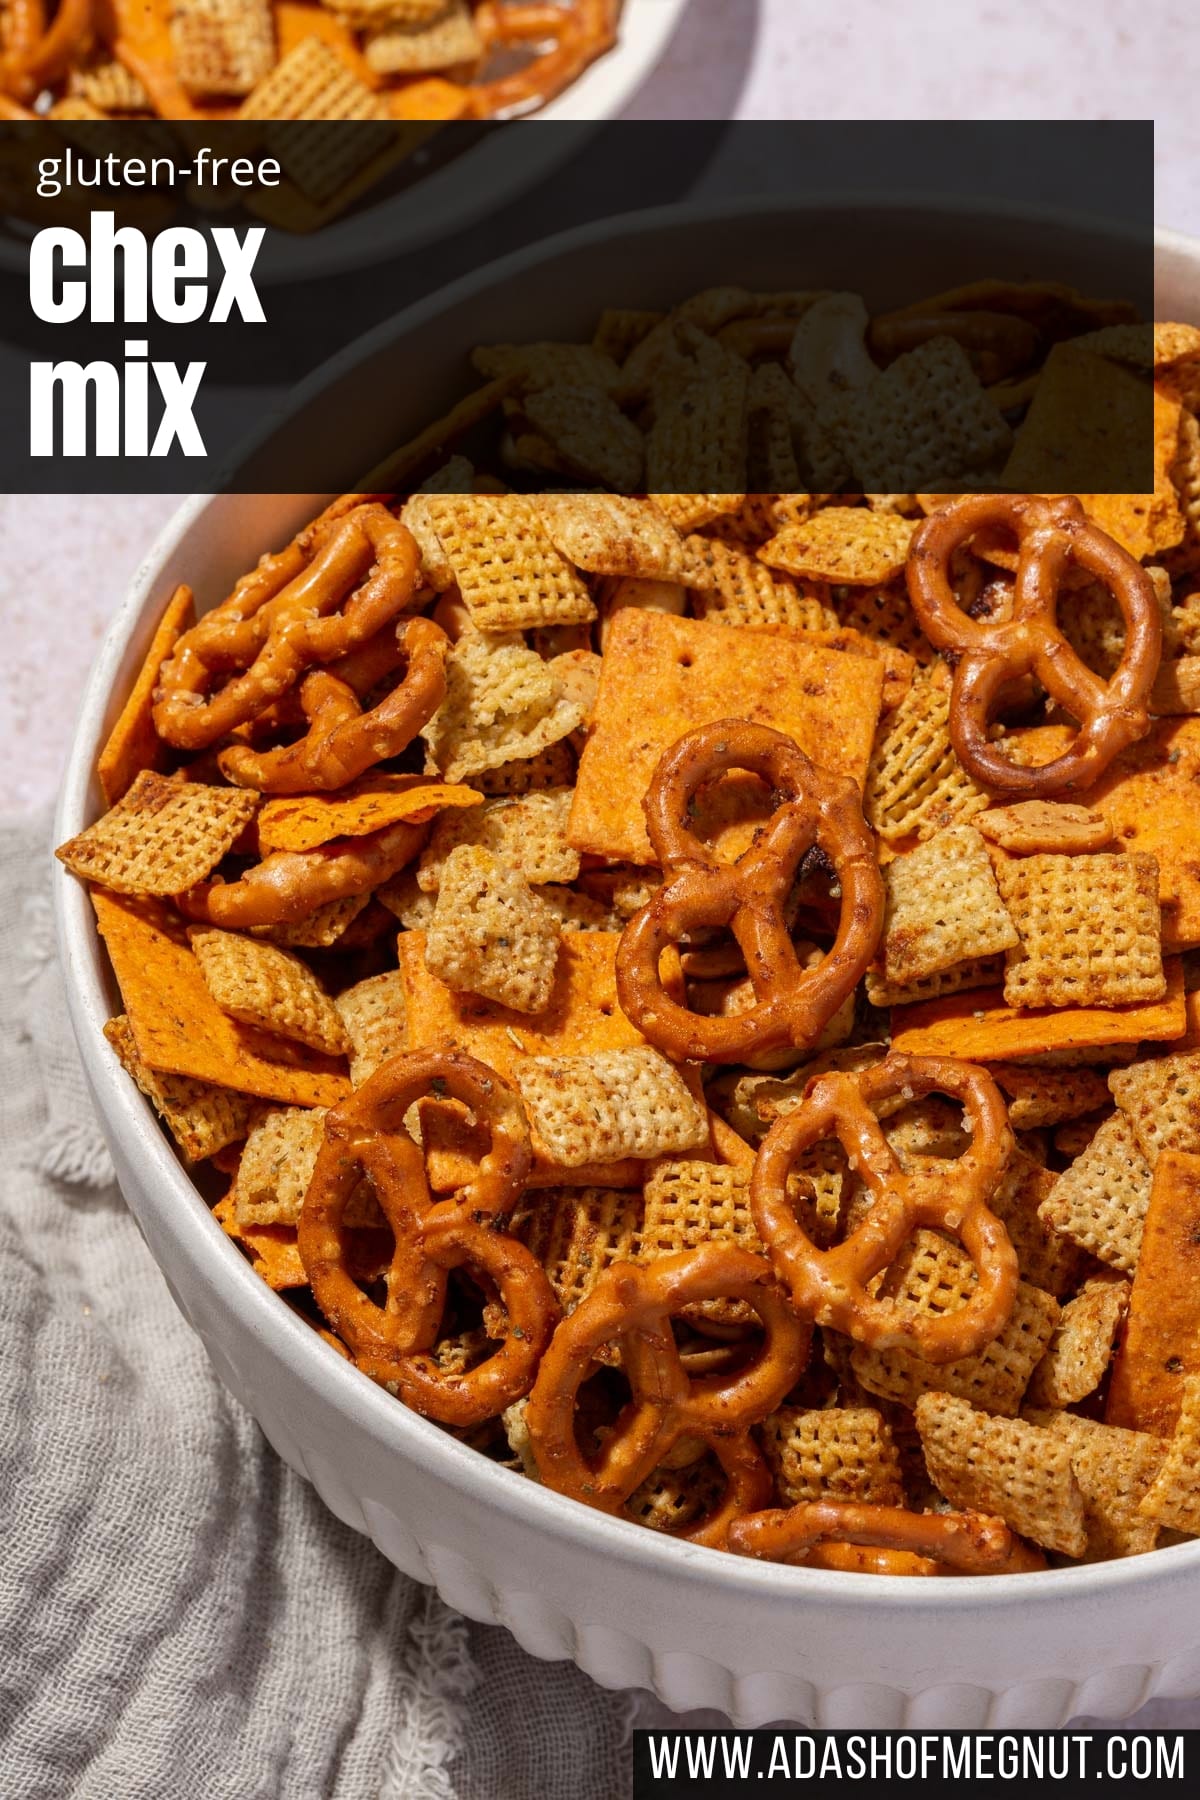 A closeup of a large serving bowl with chex mix in it.